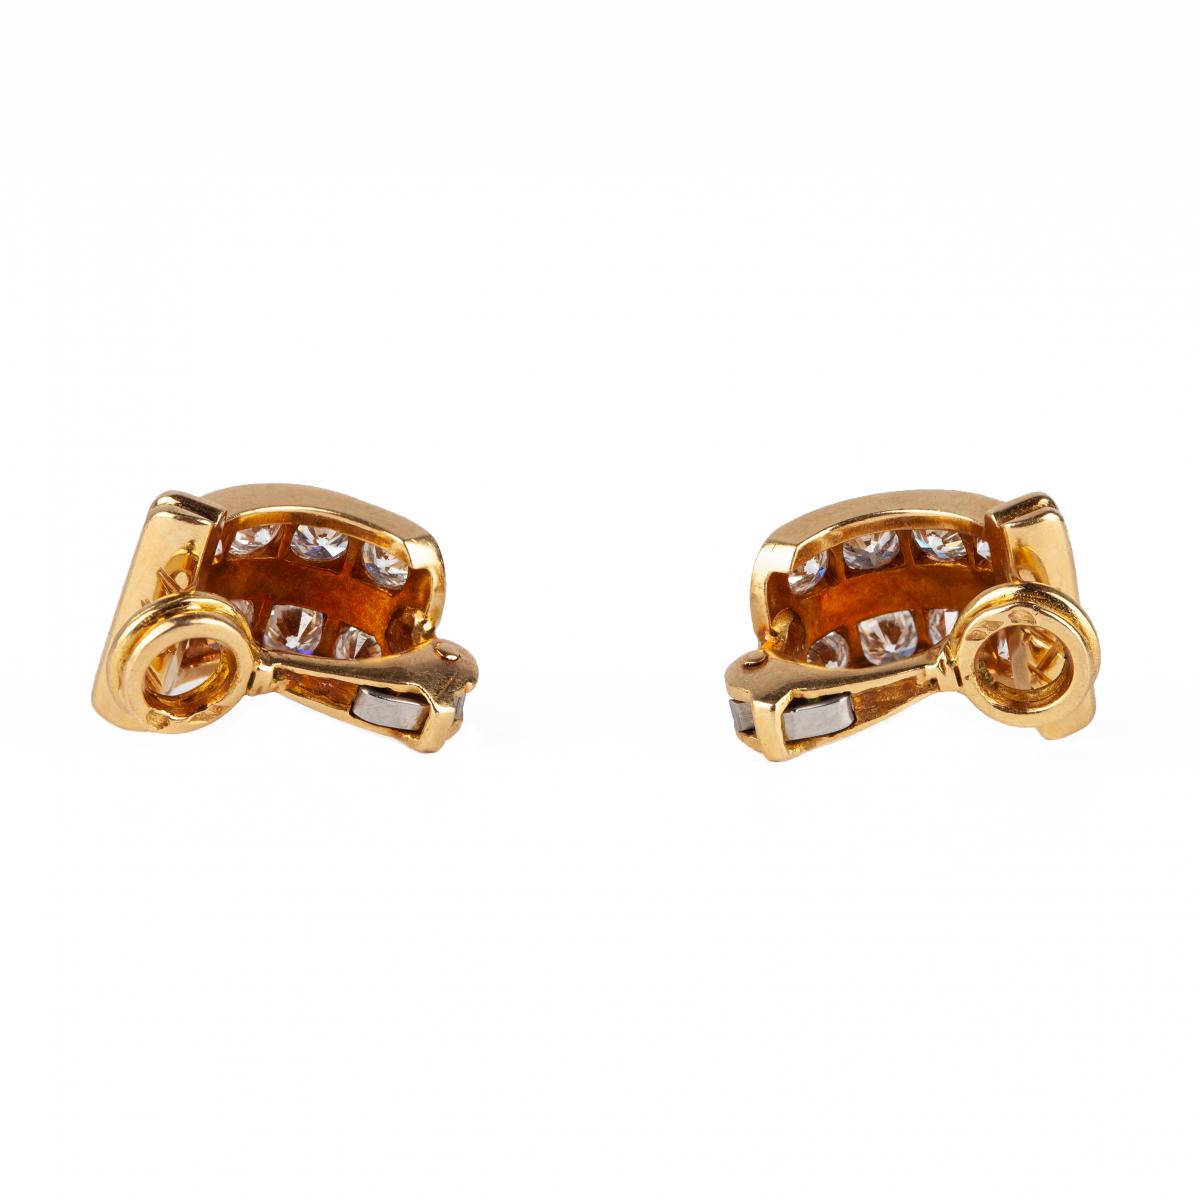 Vintage Creole Shaped Earrings in 18 Karat Gold and Diamonds, French circa 1950.